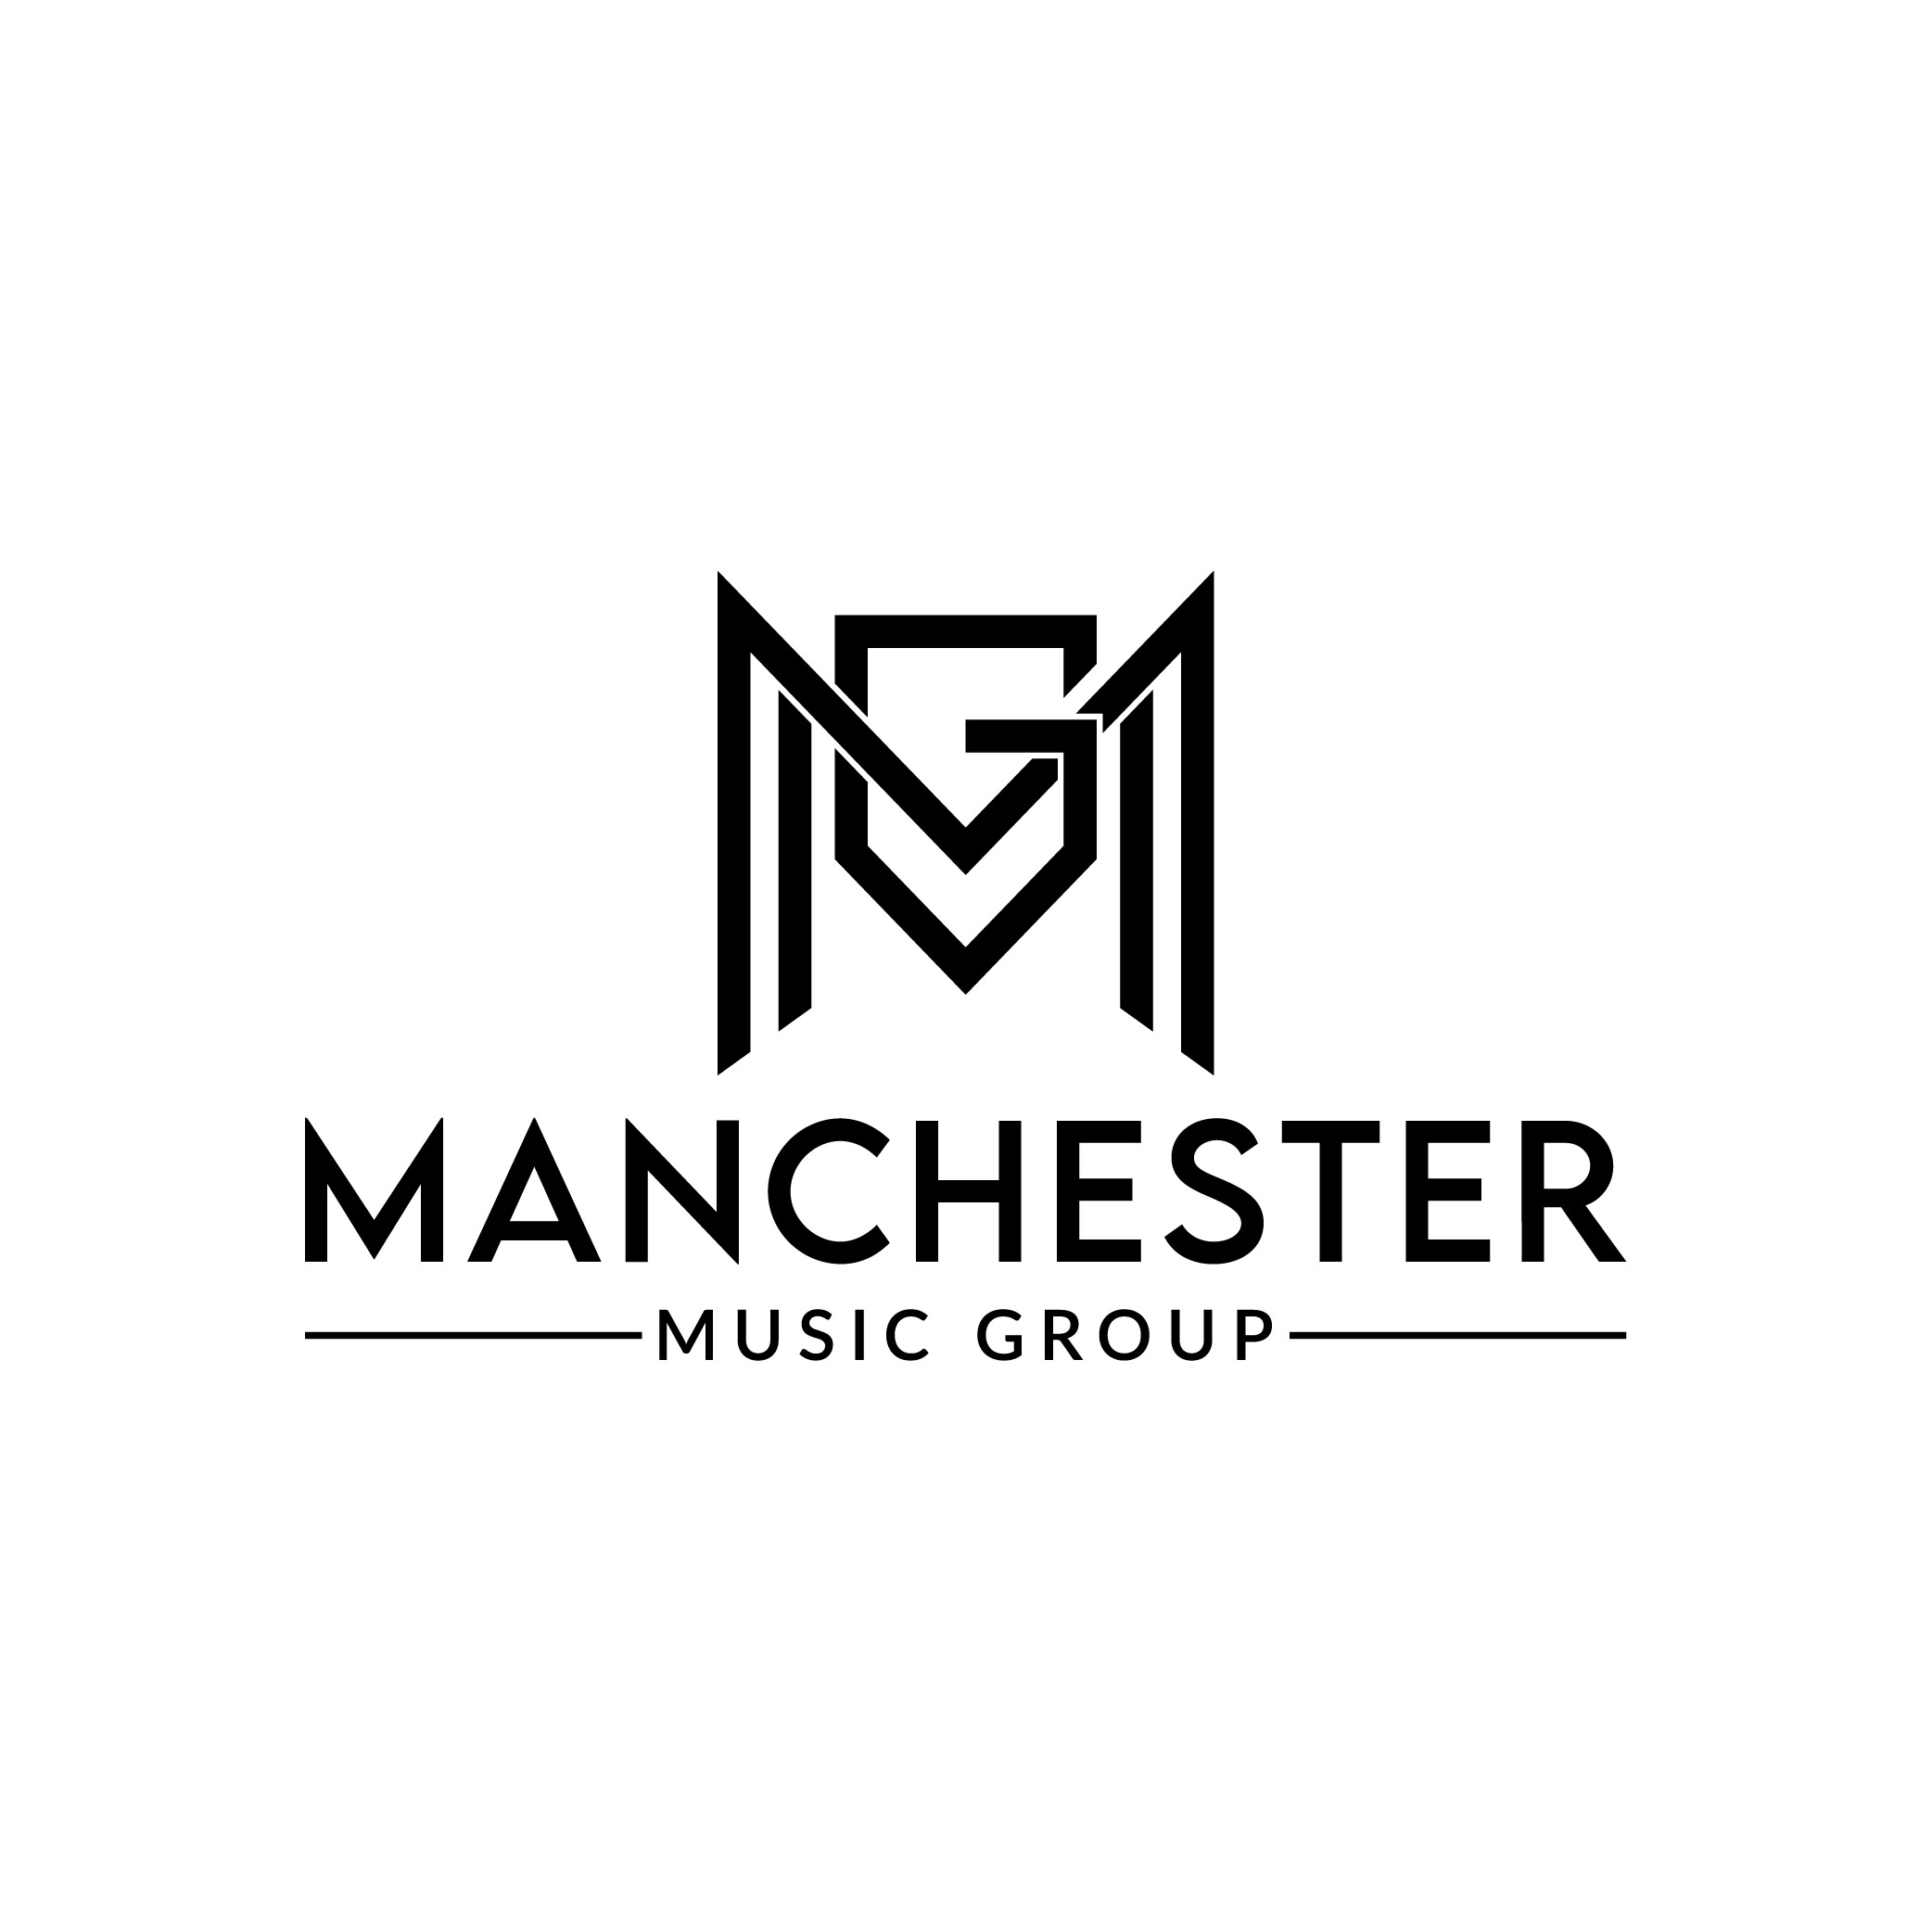 Manchester Music Group